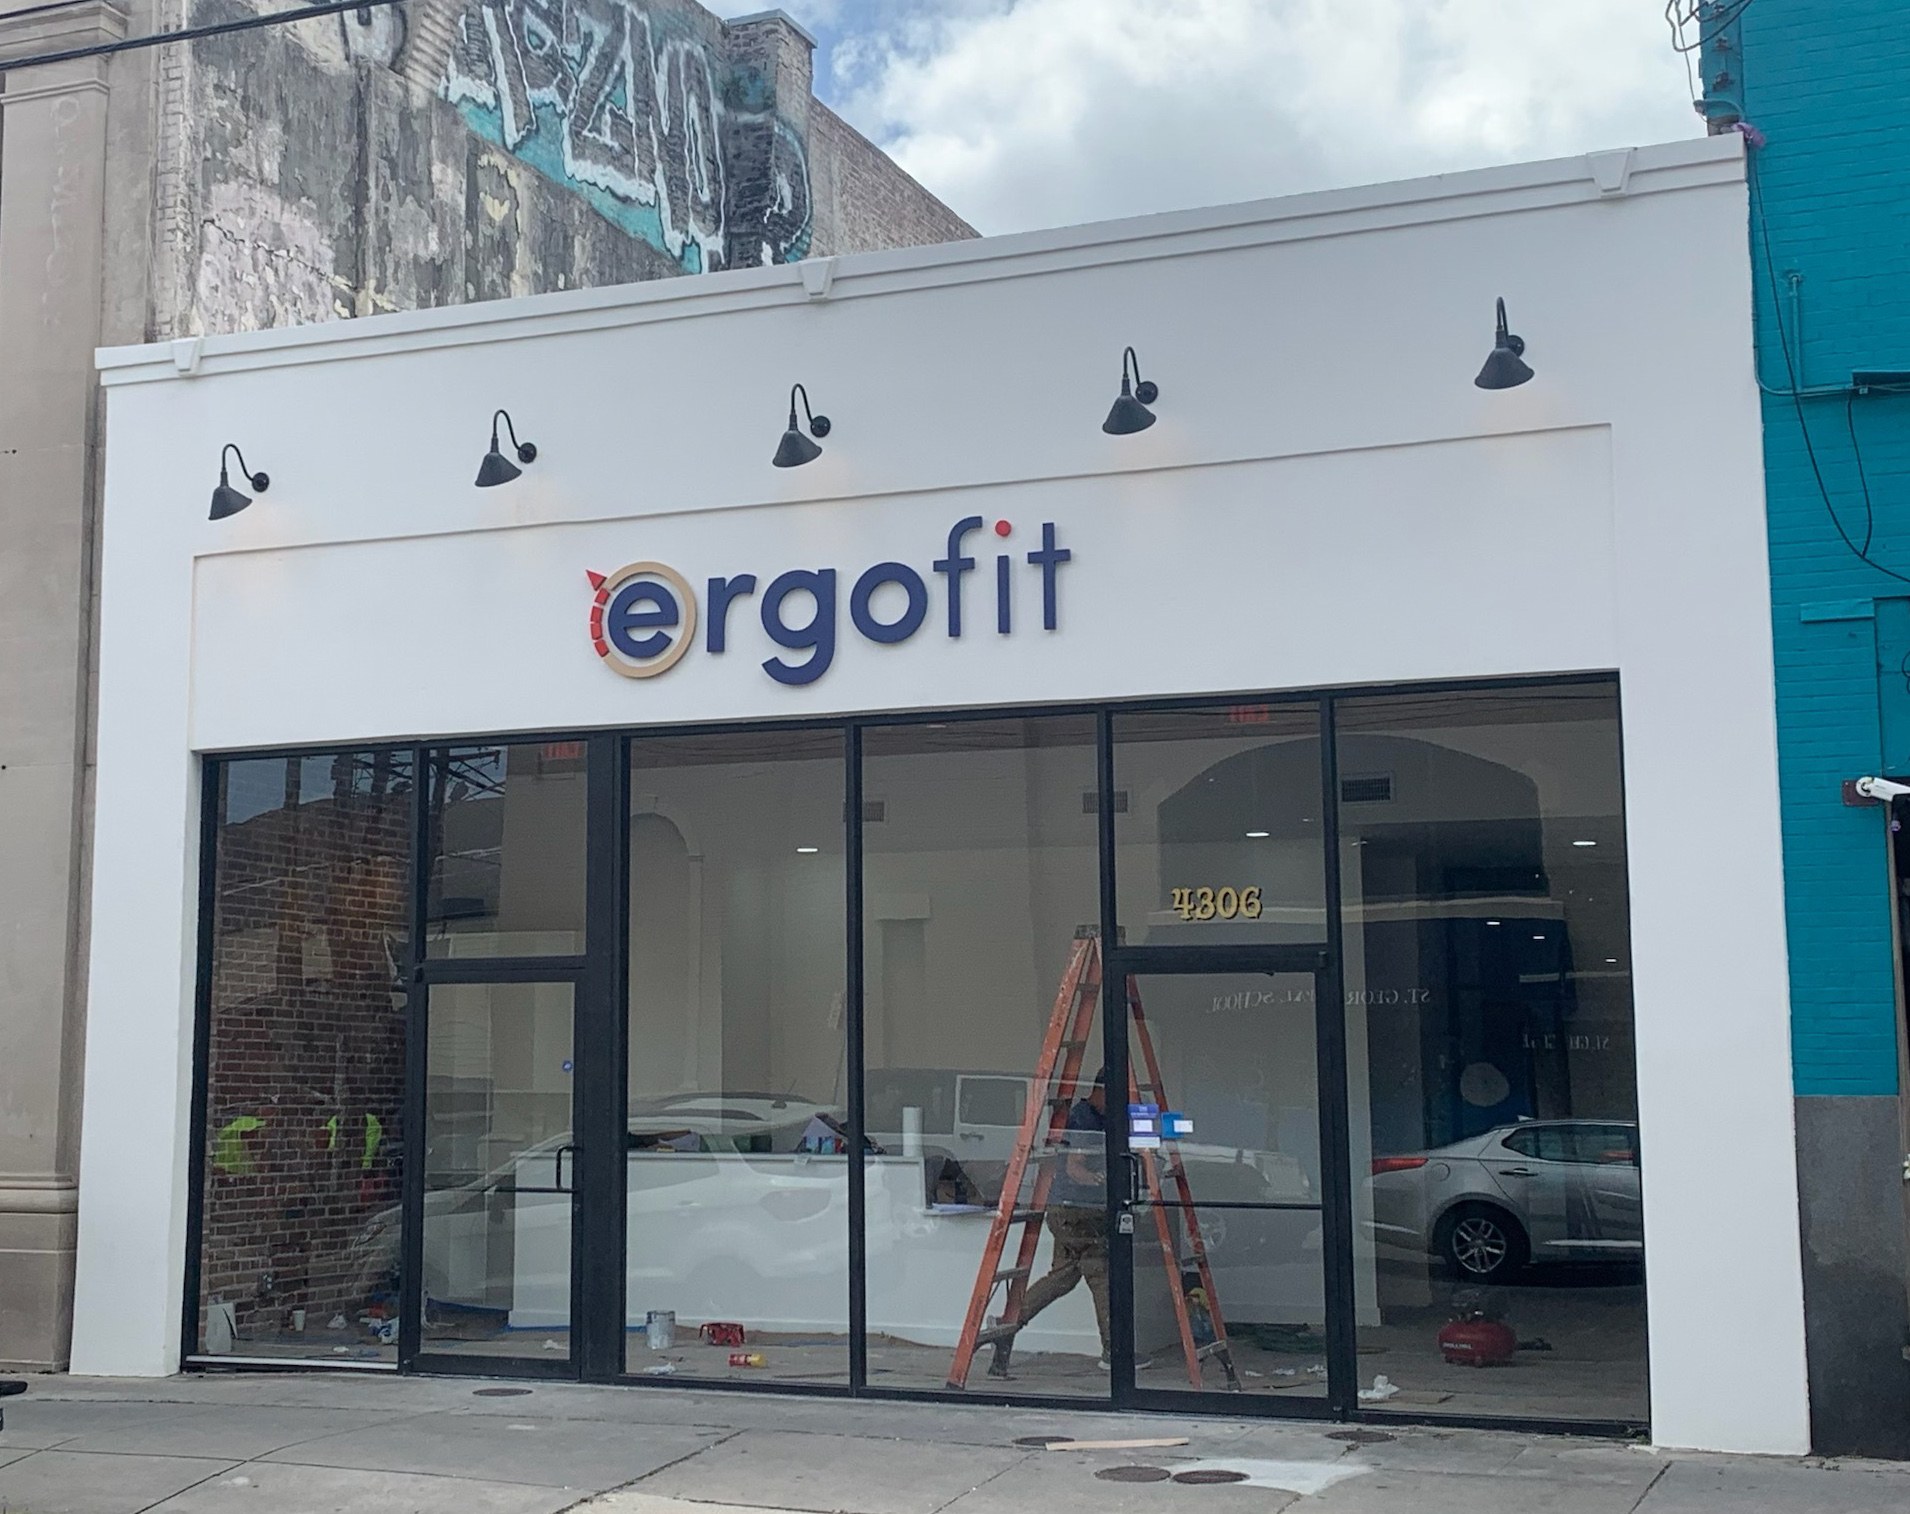 Photo of an exterior facade of one story retail space with the logo saying "ergo fit" above the storefront's large glass windows 